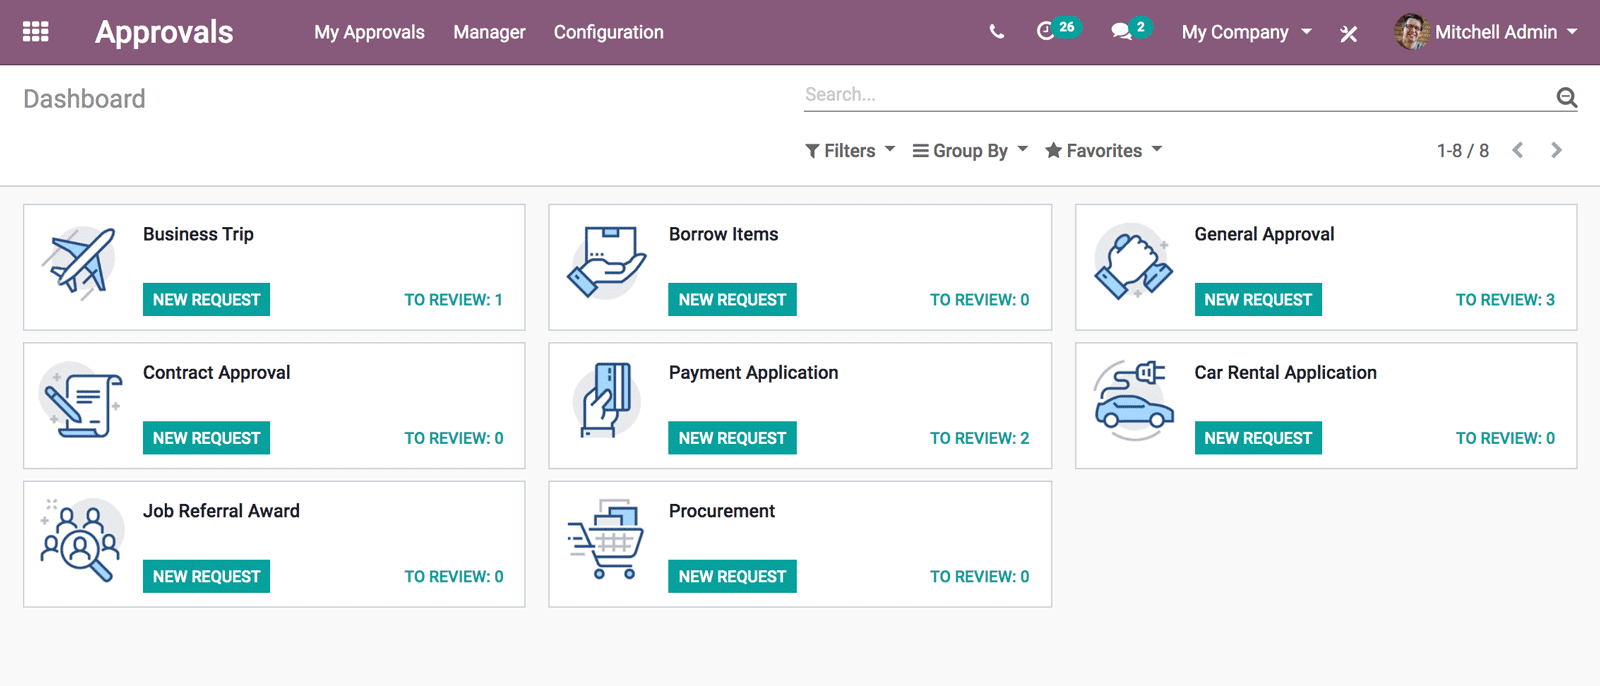 Odoo Approvals App interface